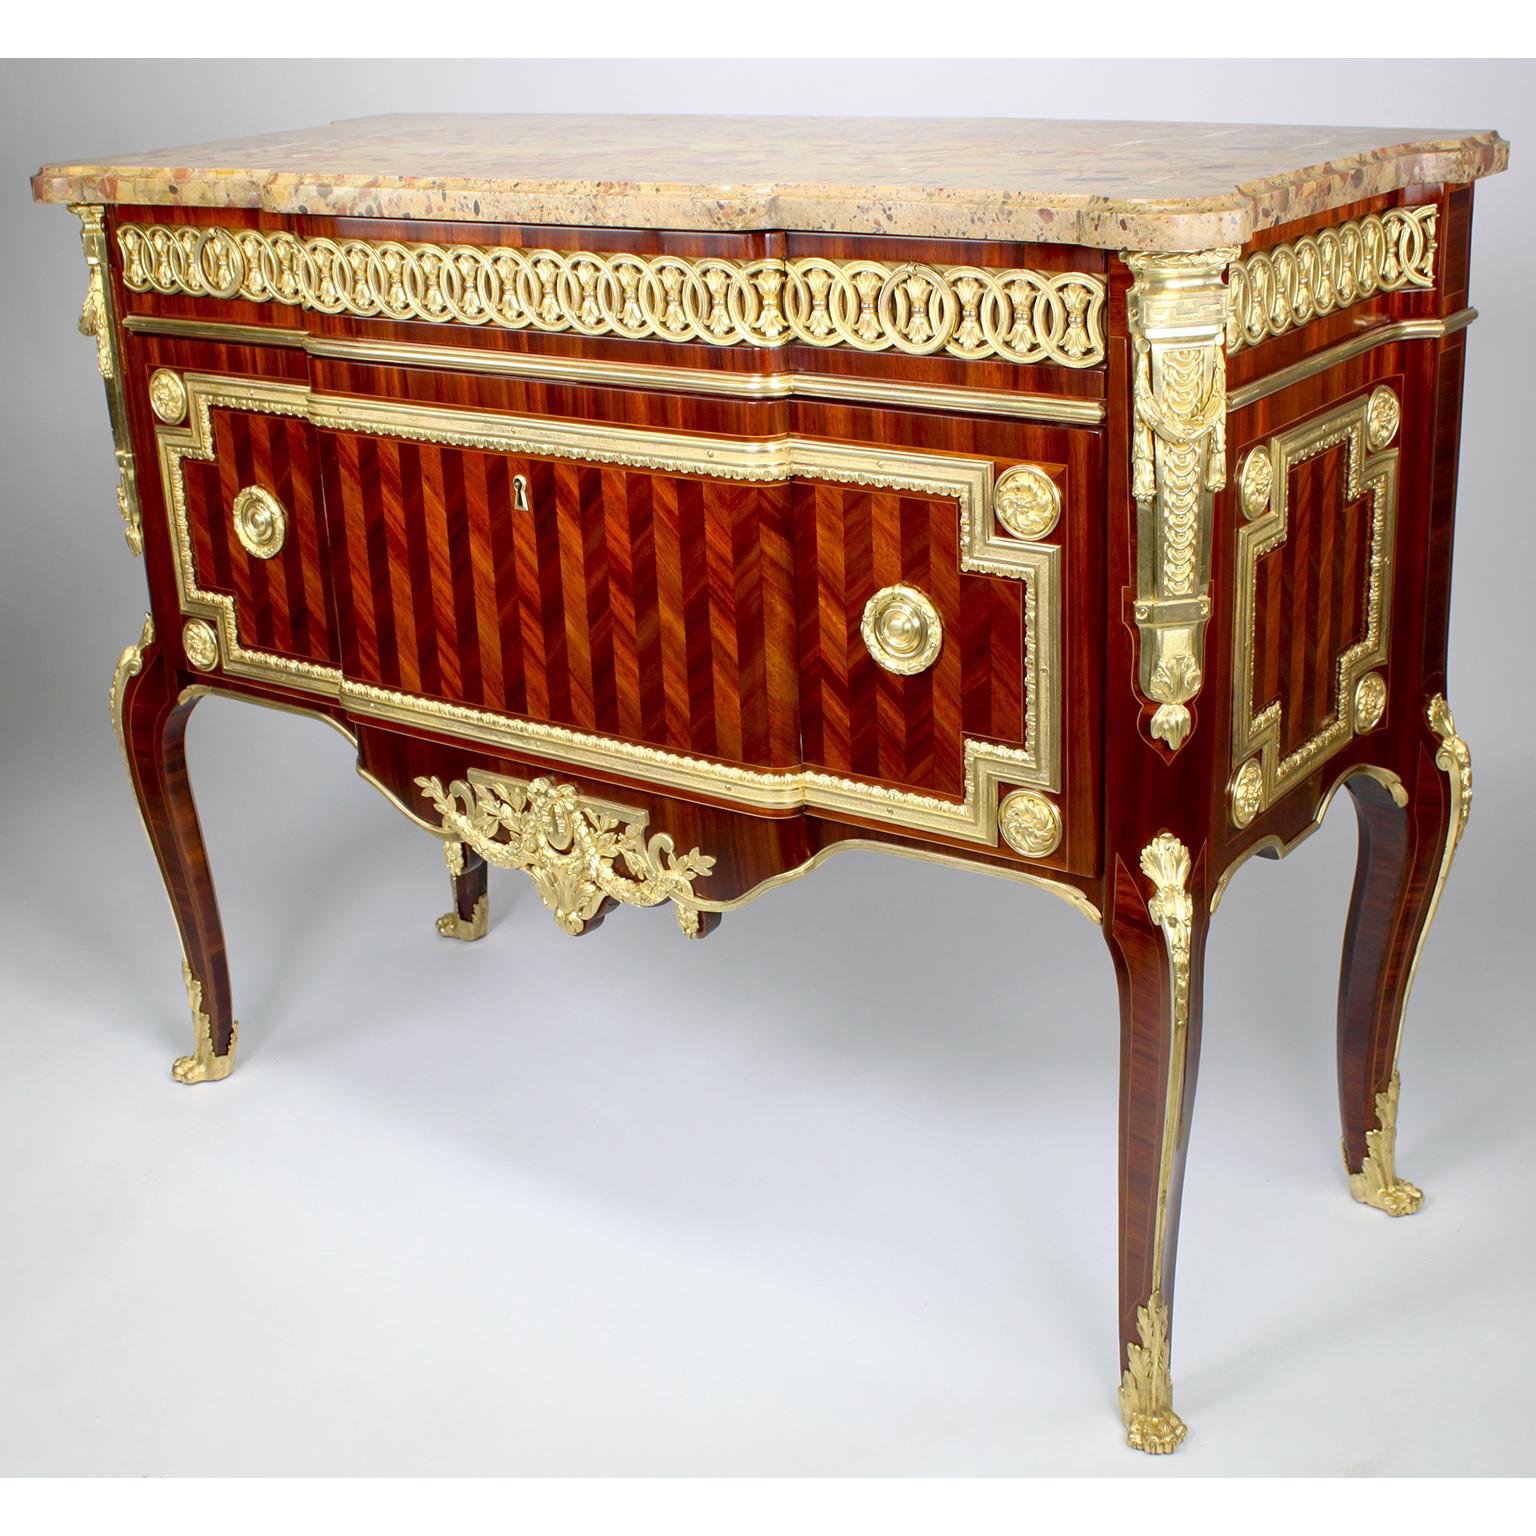 A very fine pair of French 19th/20th century Louis XV/XVI style Transitional Style Satinwood Parquetry and Gilt-Bronze Mounted Commodes with Brêche d'Alep marble-tops, attributed to François Linke (1855-1946), inspired by models by Léonard Boudin